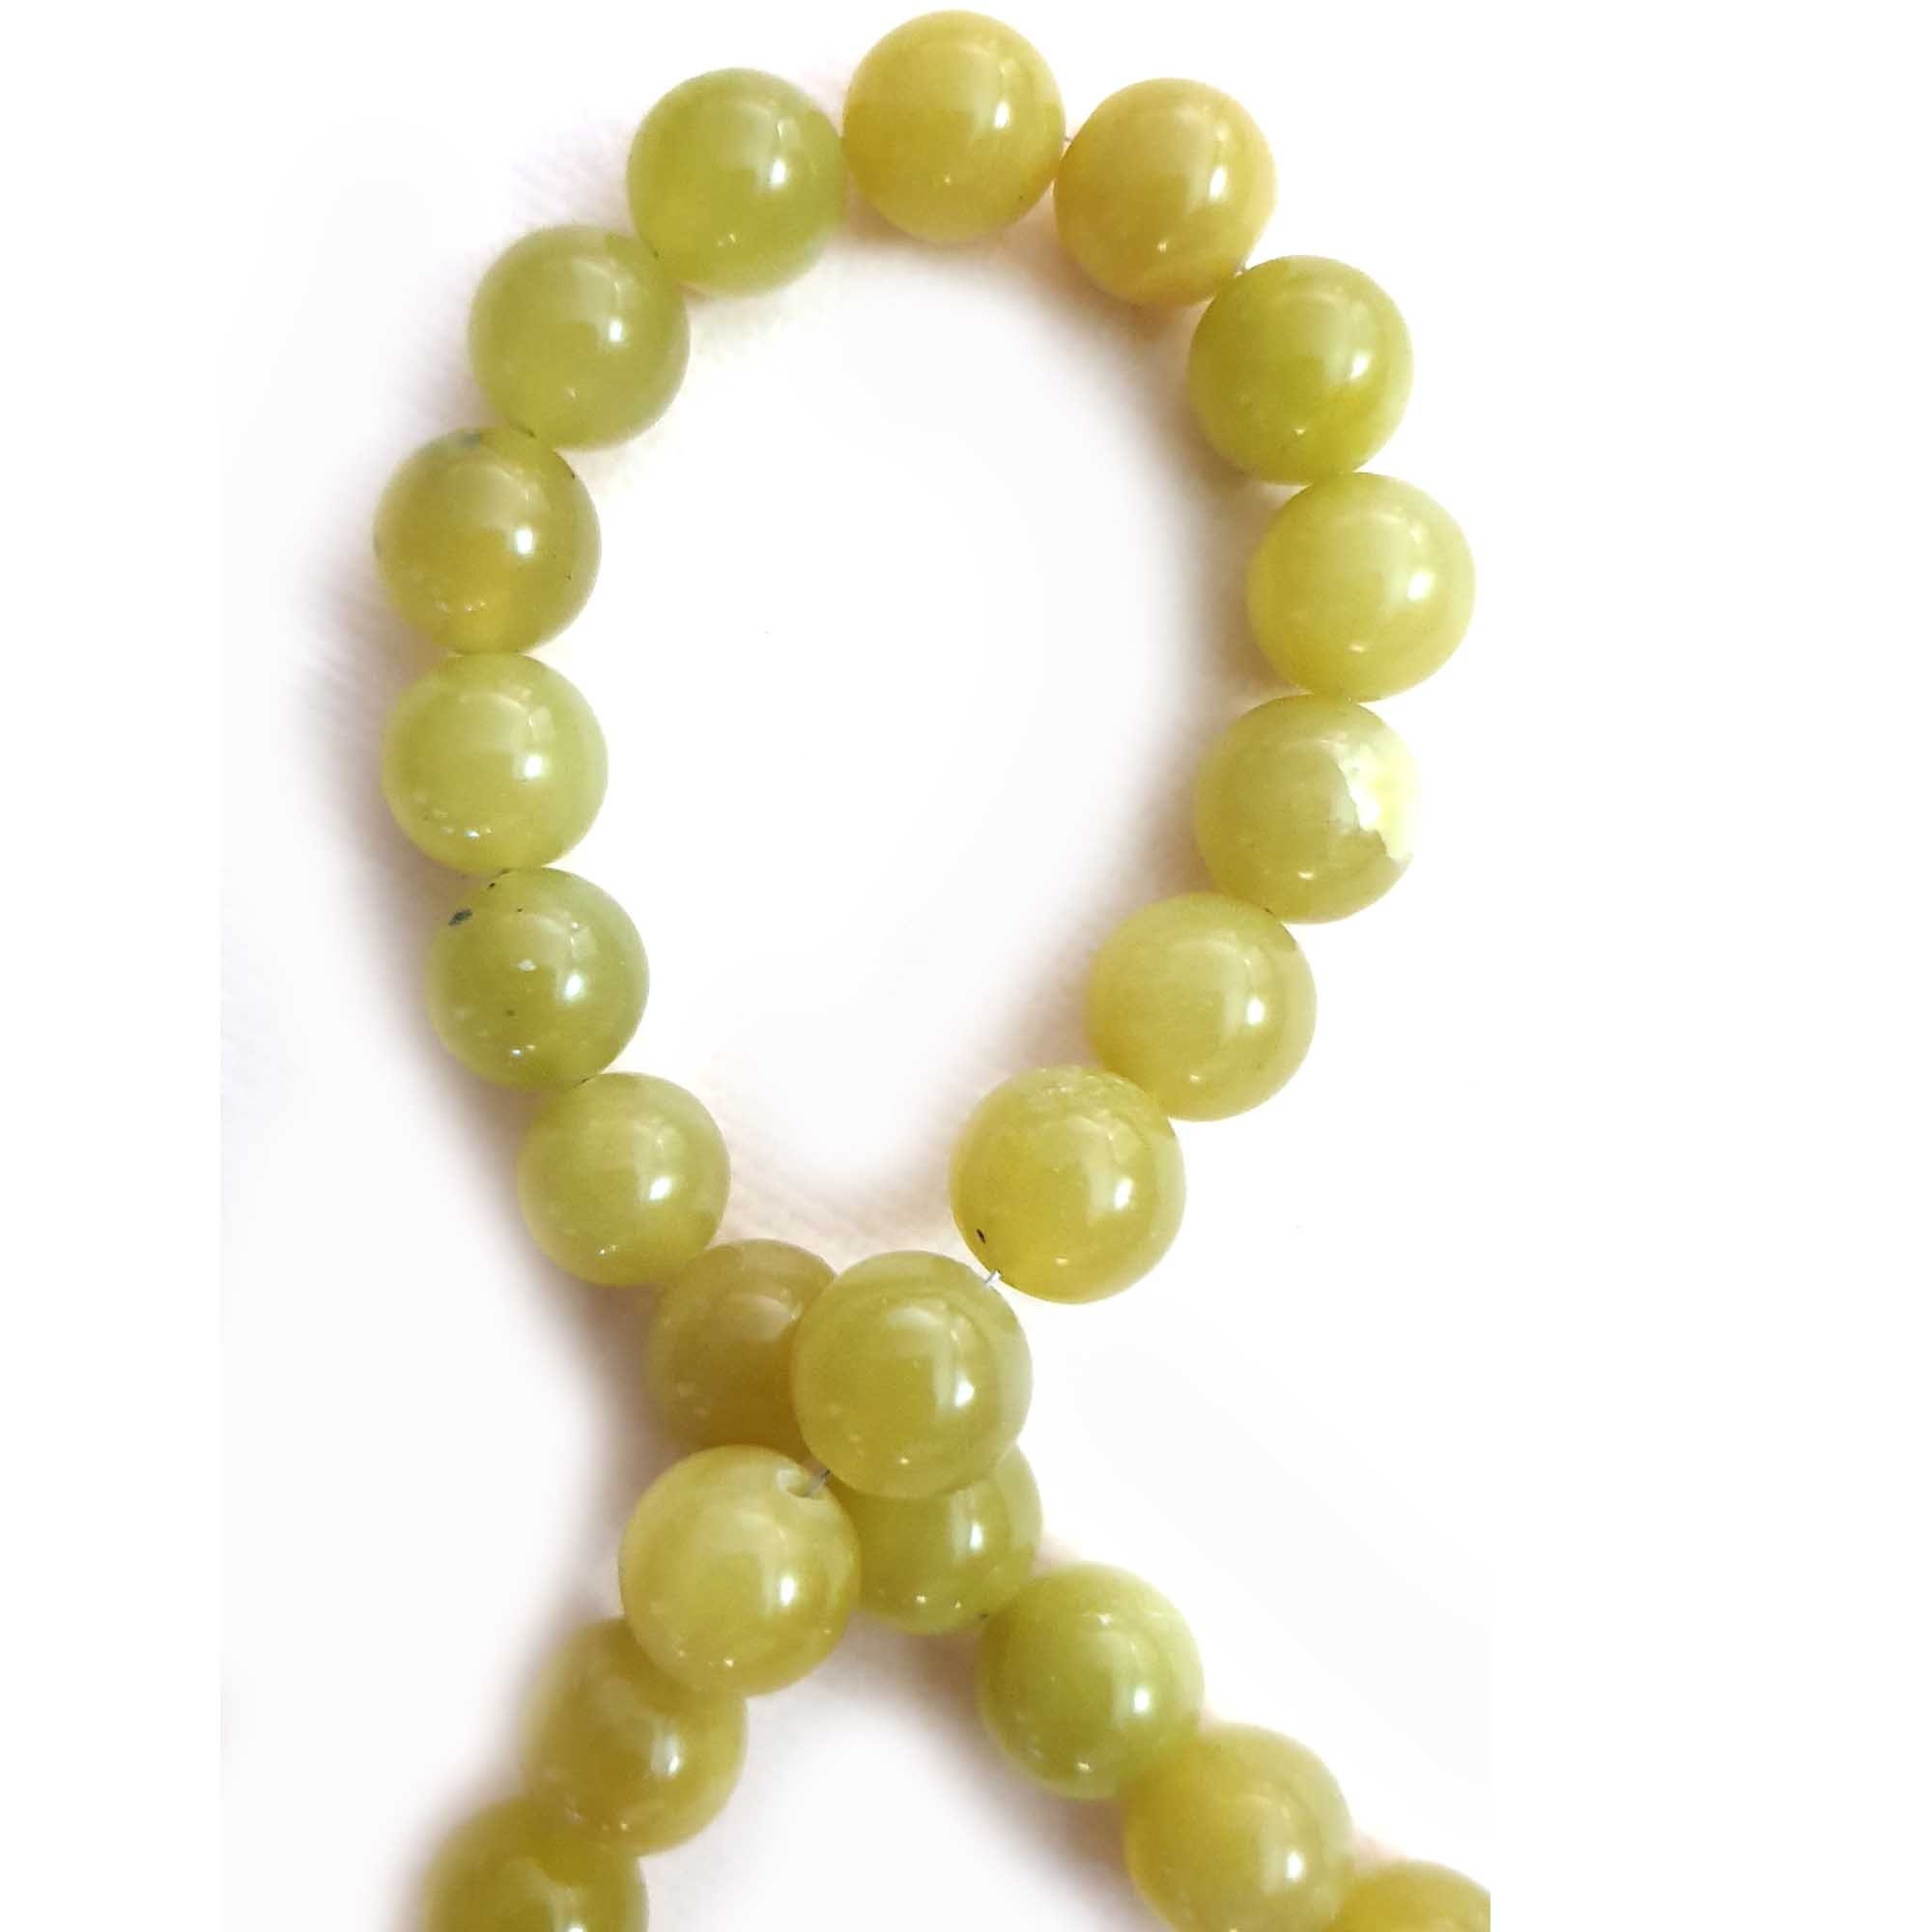 Natural Multi-Tones Green Jade Beads Smooth Polished Round 6mm-12mm 15.4  Inch Full Strand for Jewelry Making (GJ29) (12mm)